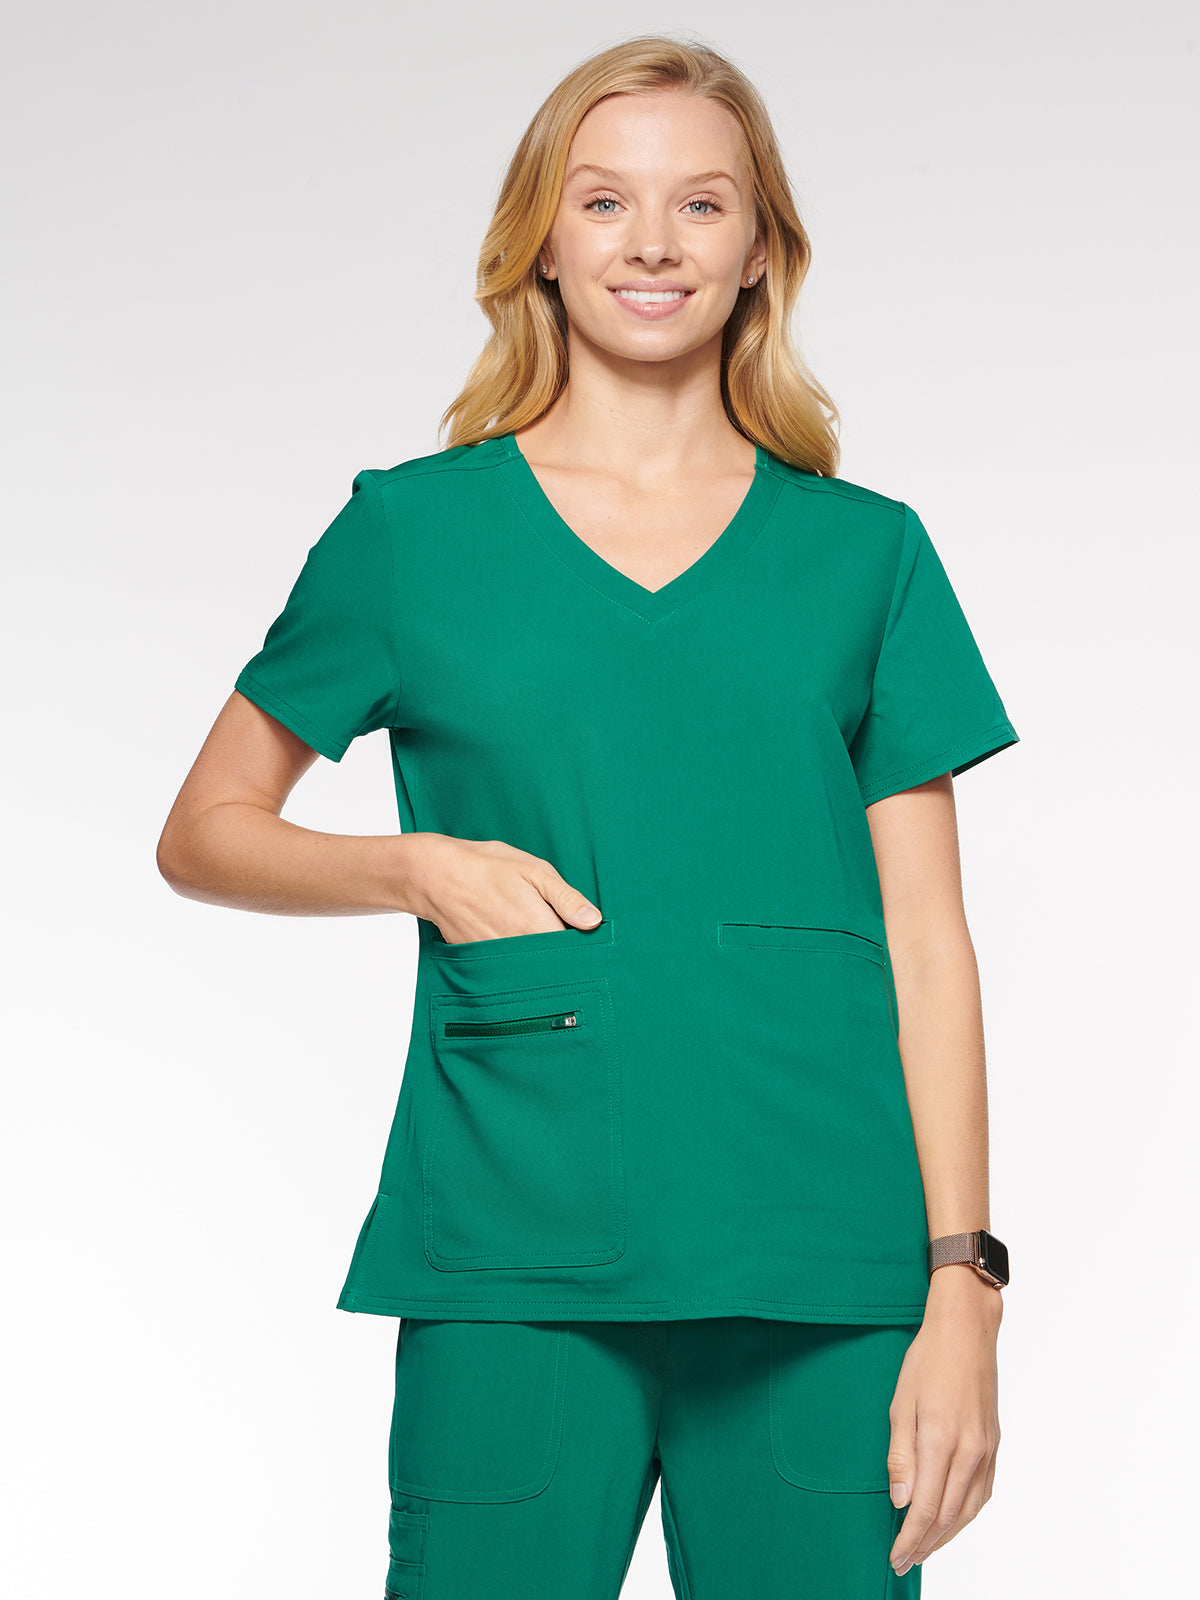 Nile Womens Top Rounded V-Neck with 4 Pockets (94002)